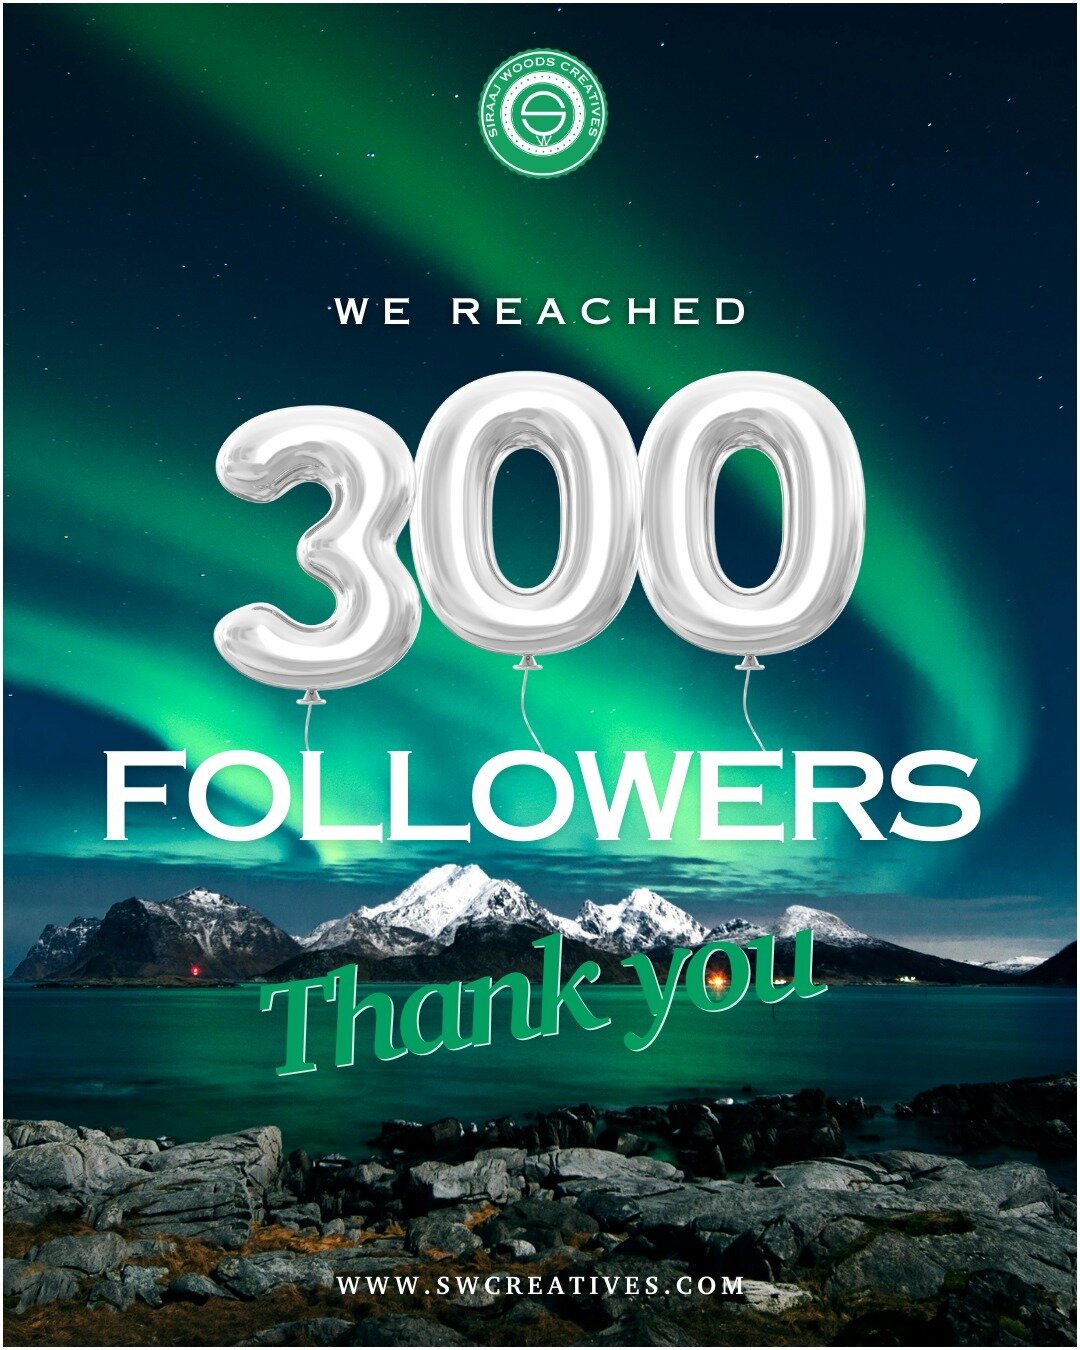 We reached 3️⃣0️⃣0️⃣ followers!

Thank you to all of you for your support.
We're so grateful to have such an amazing community and we can't wait to see what the future holds. 💚

#socialmediamarketing #swc #marketing #contentcreation #smallbusiness